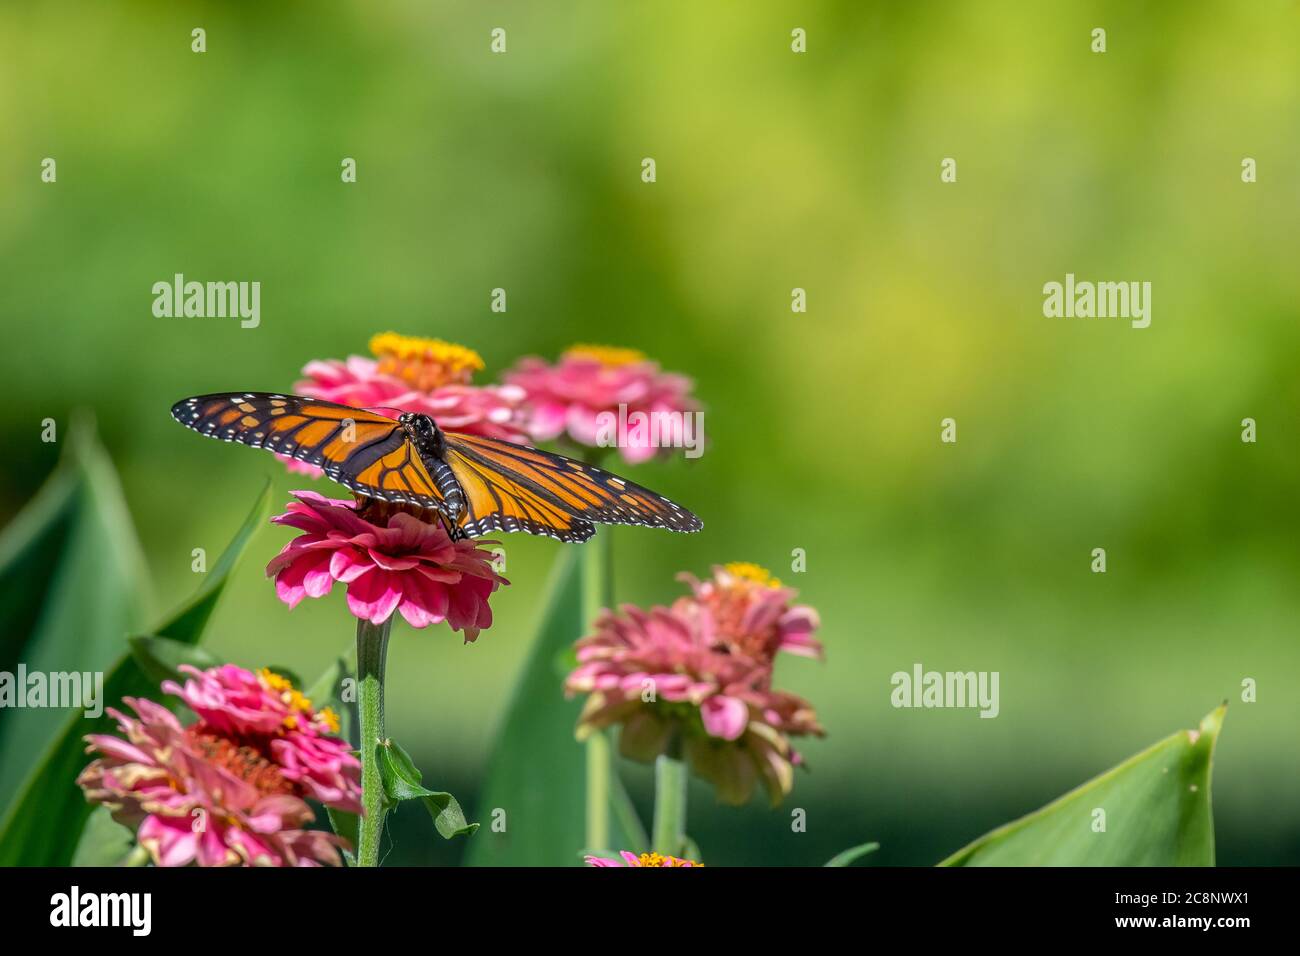 Closeup of a beautiful bright orange and black monarch butterfly feeding on a brilliant pink zinnia flower bloom in a garden. Stock Photo